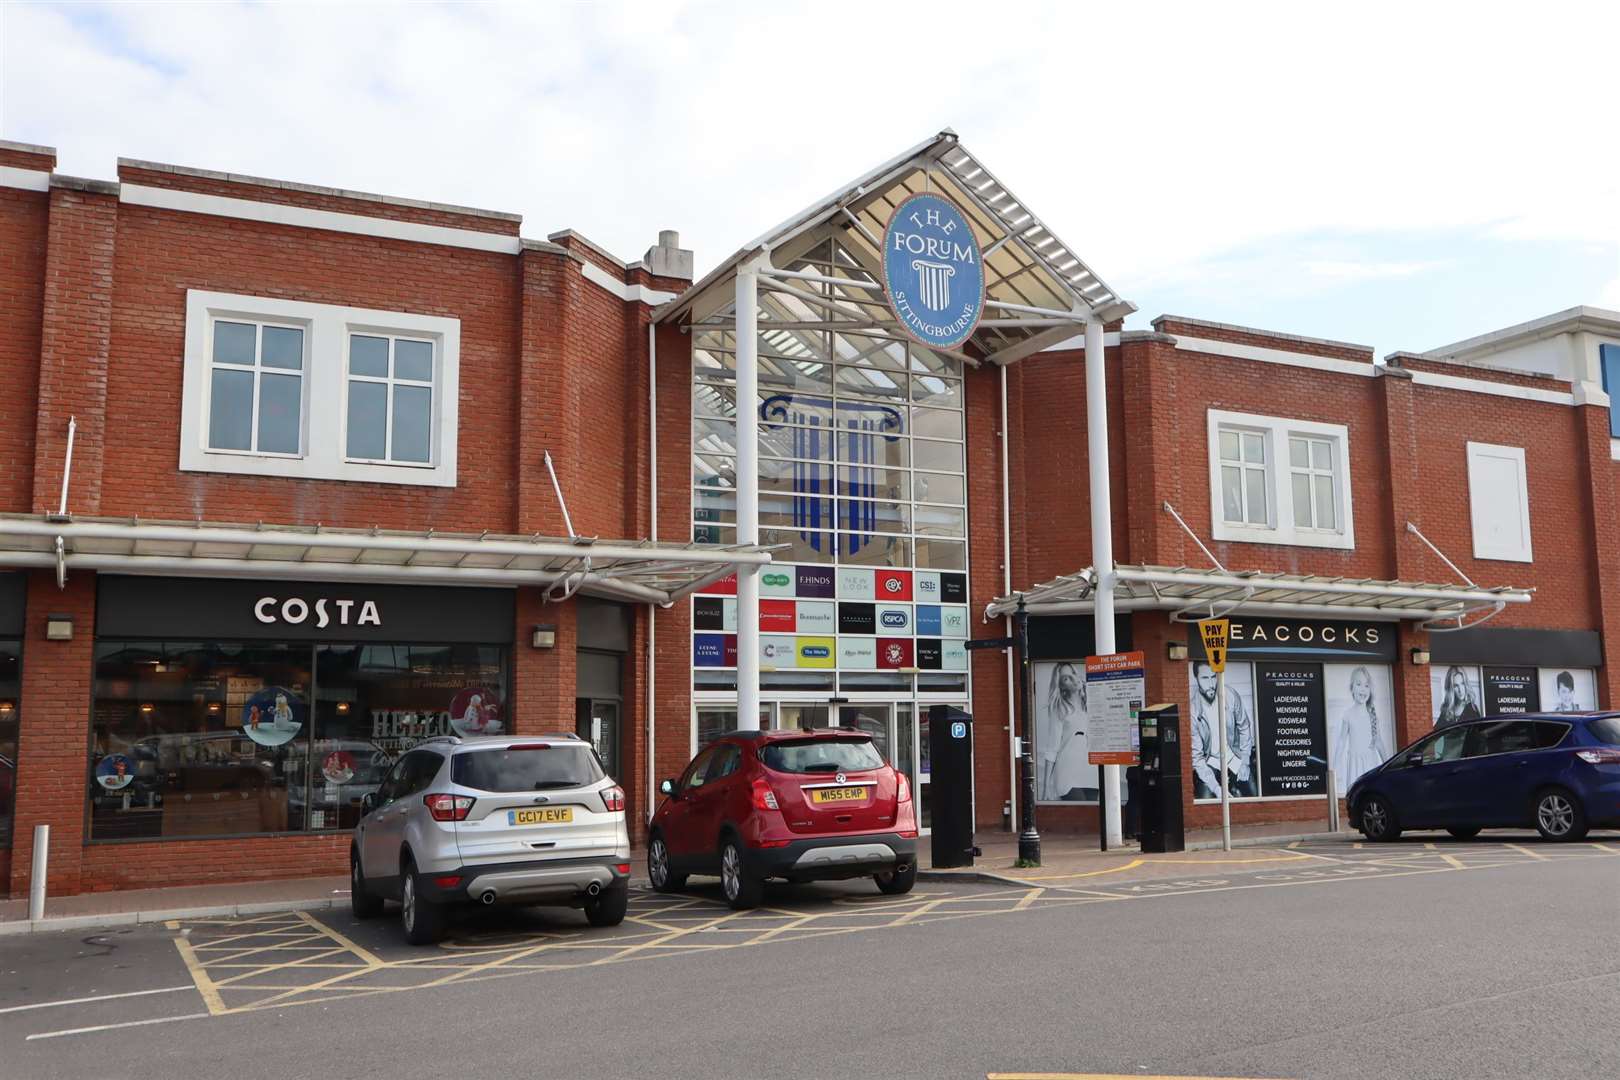 Motorists now have to pay until midnight to use the Forum car park in Sittingbourne